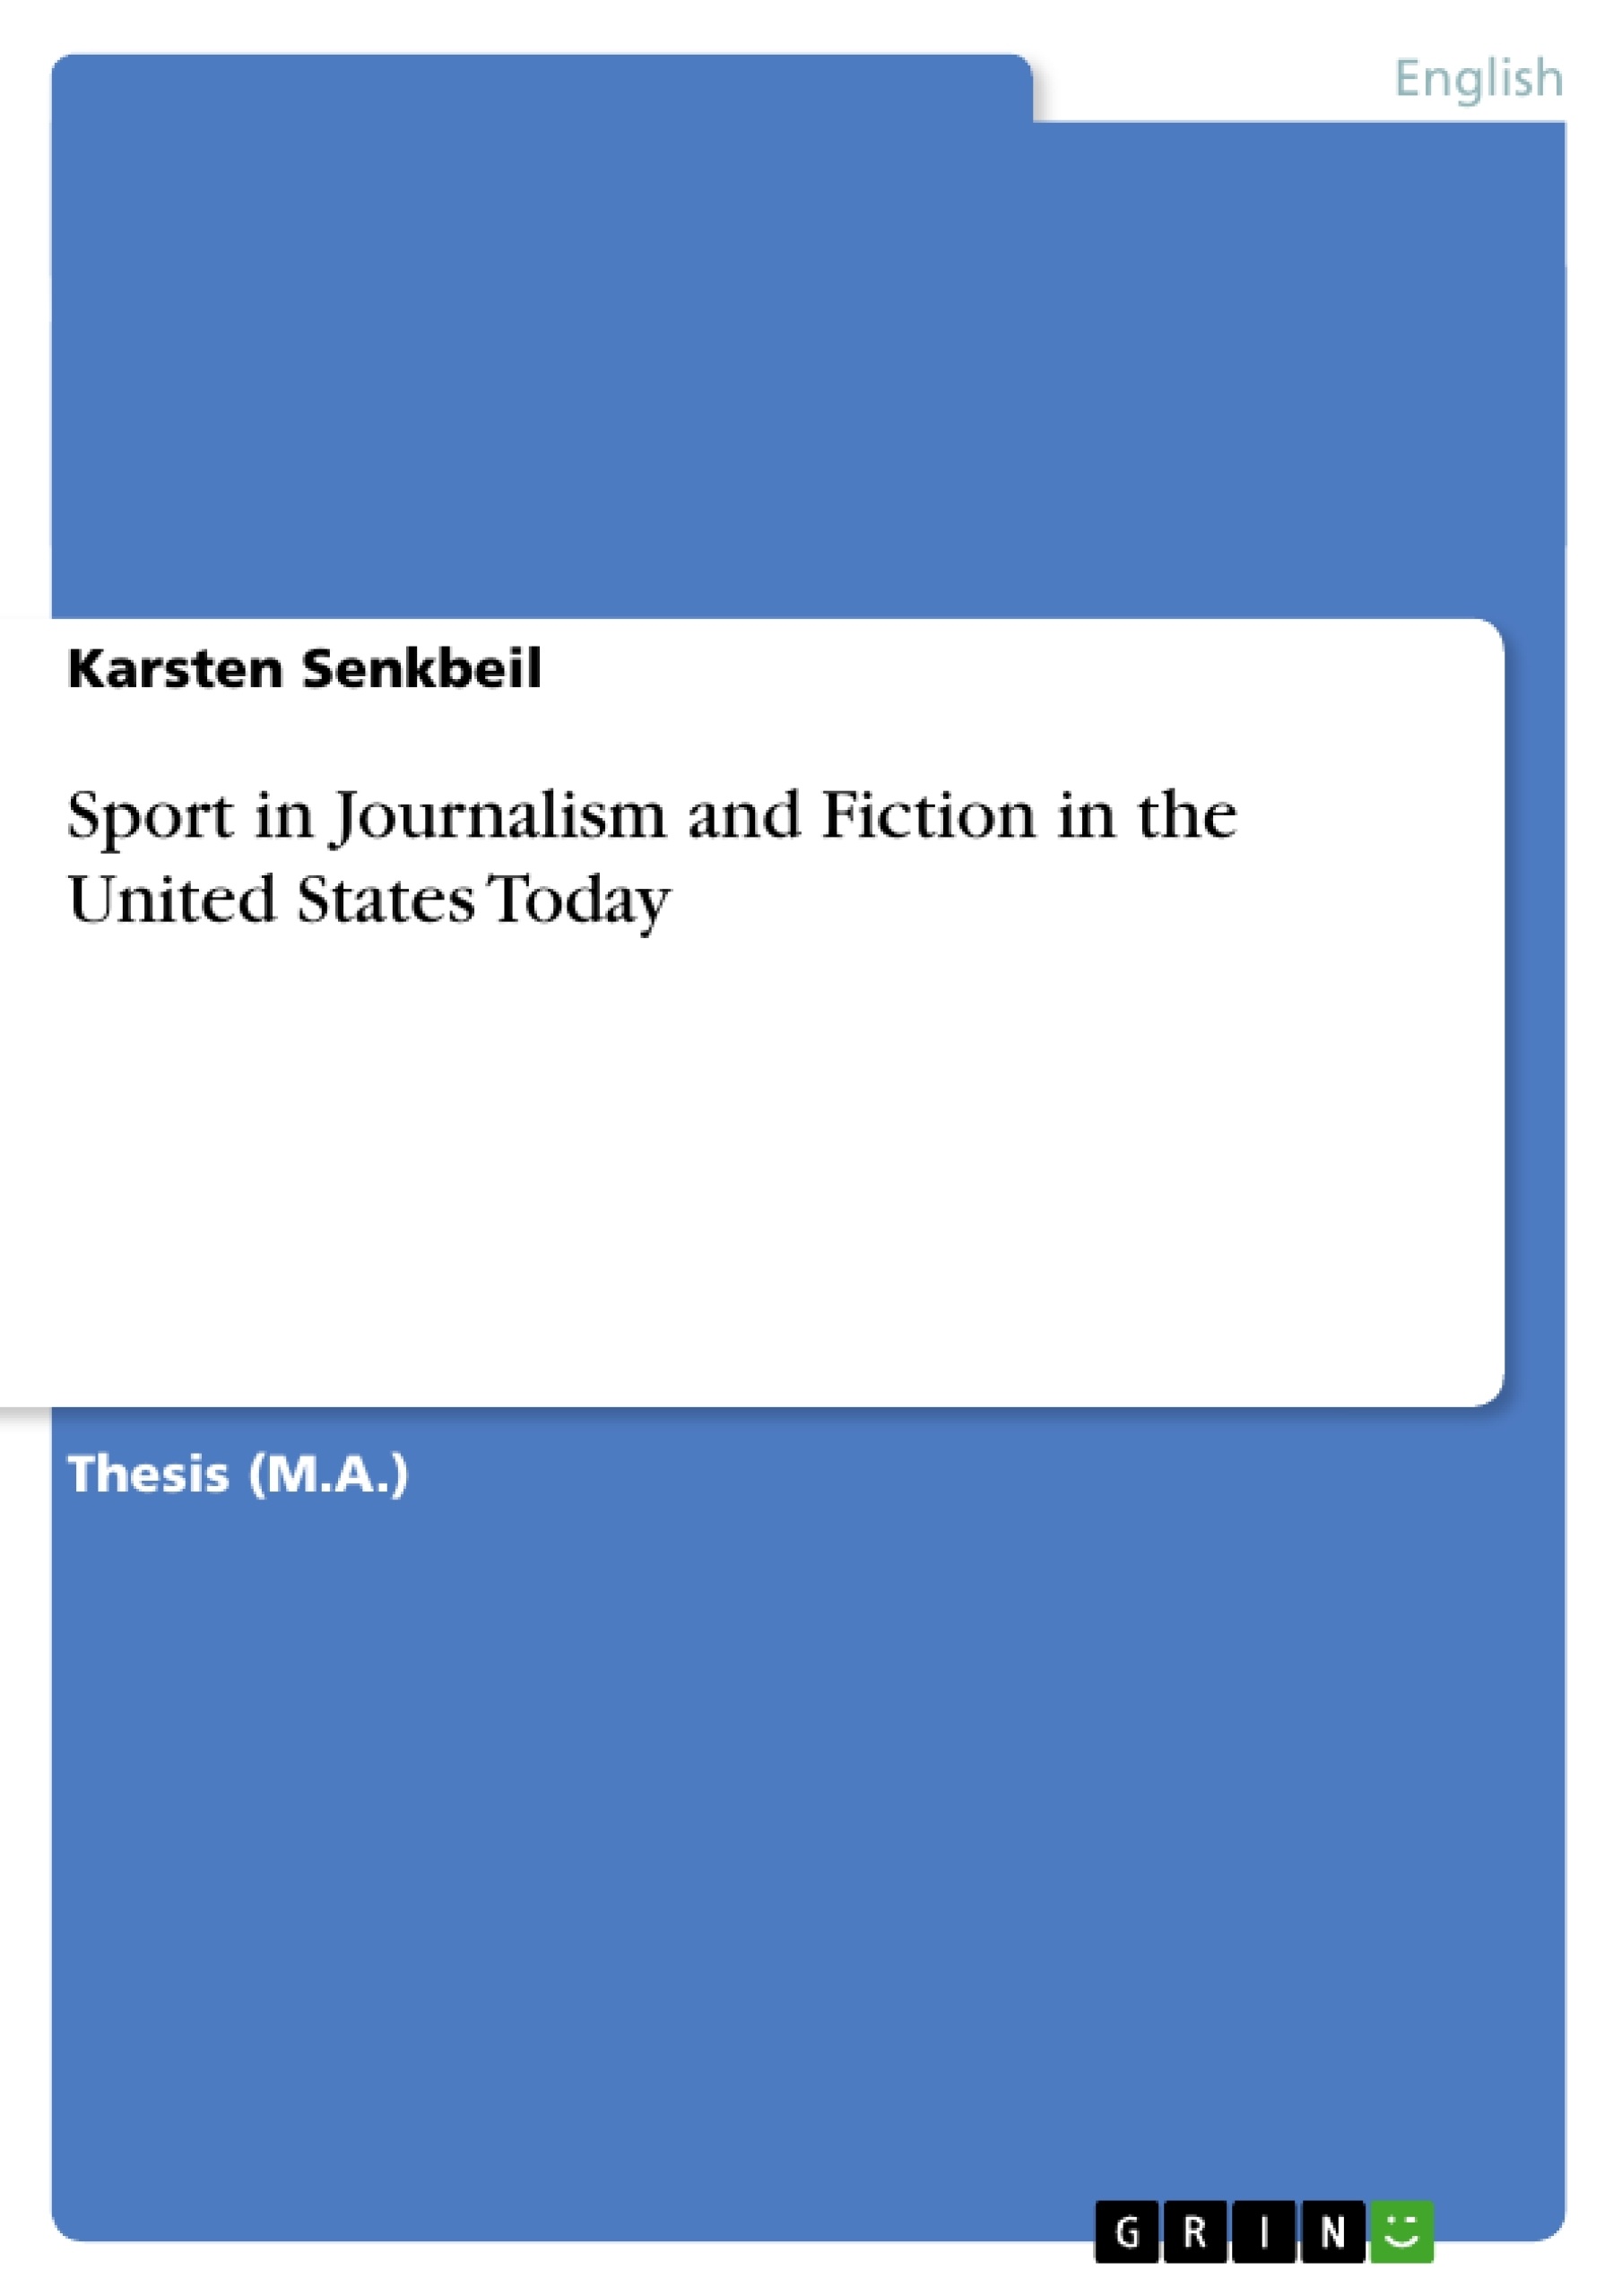 Title: Sport in Journalism and Fiction in the United States Today